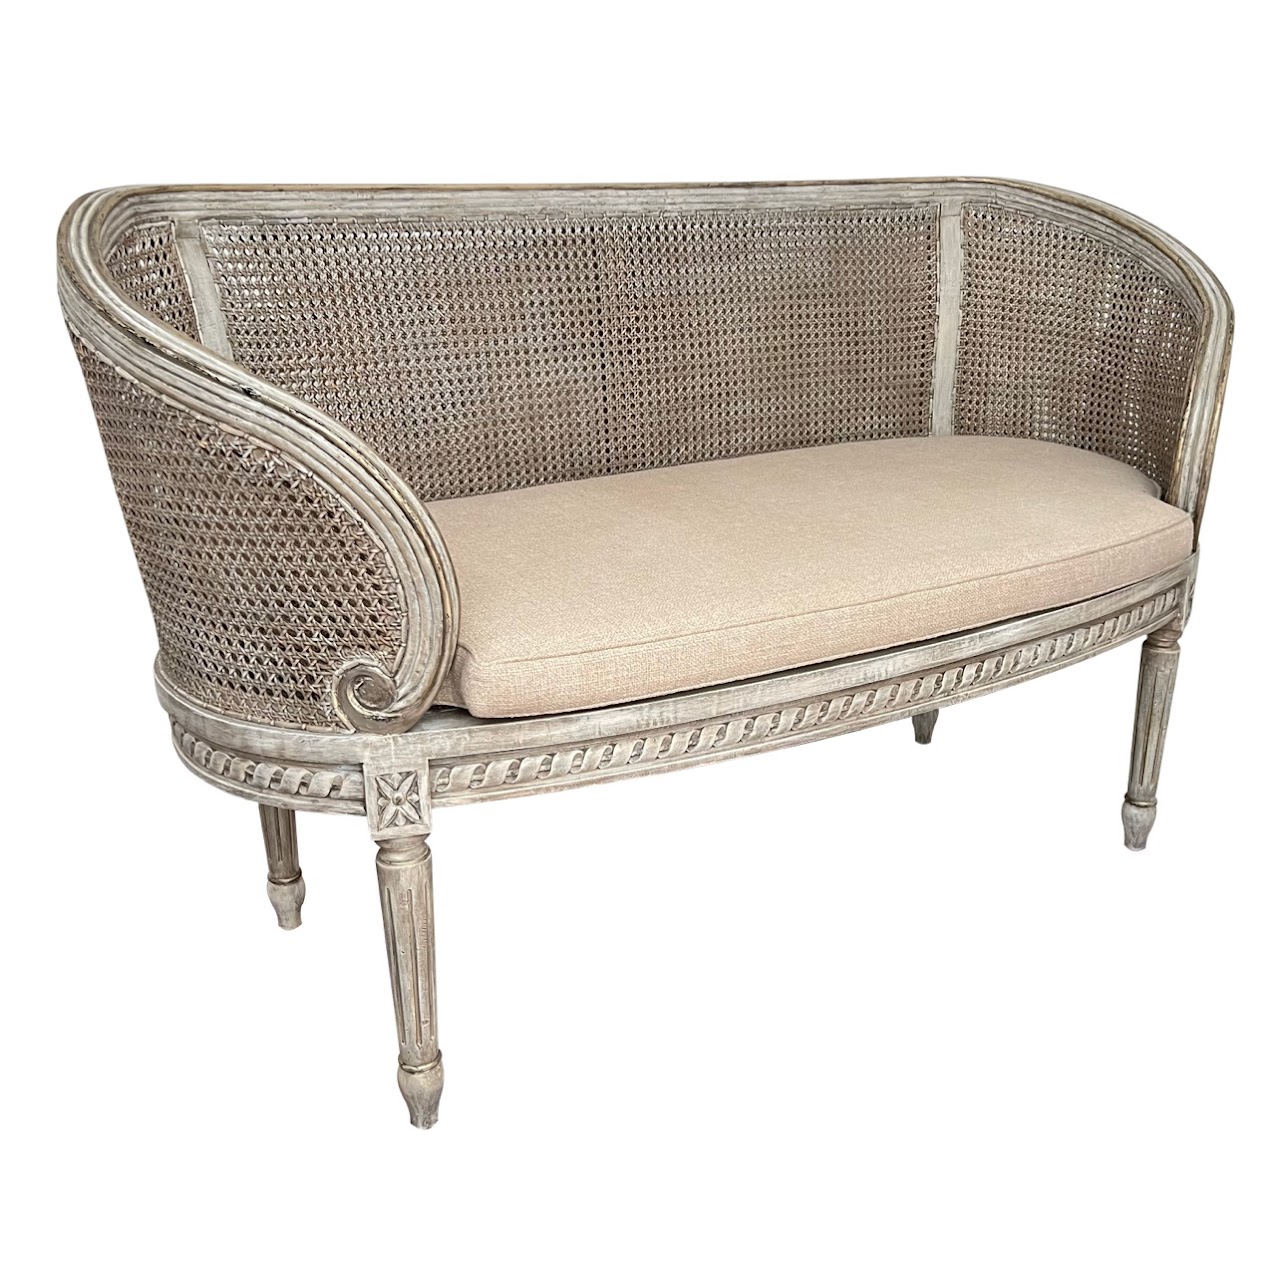 French Provincial Louis XVI Style Caned Settee